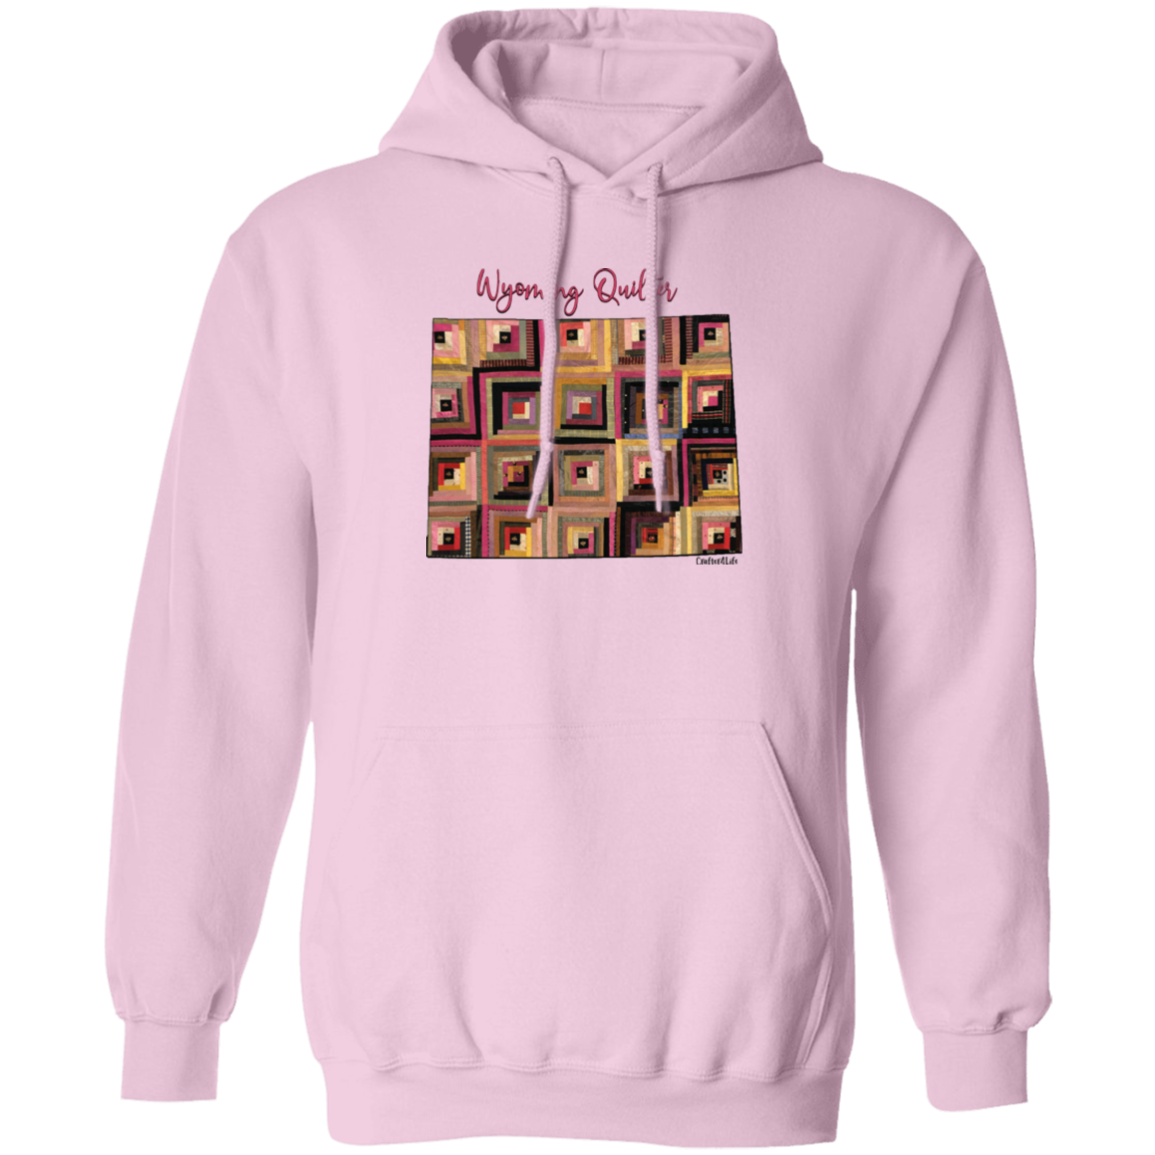 Wyoming Quilter Pullover Hoodie, Gift for Quilting Friends and Family